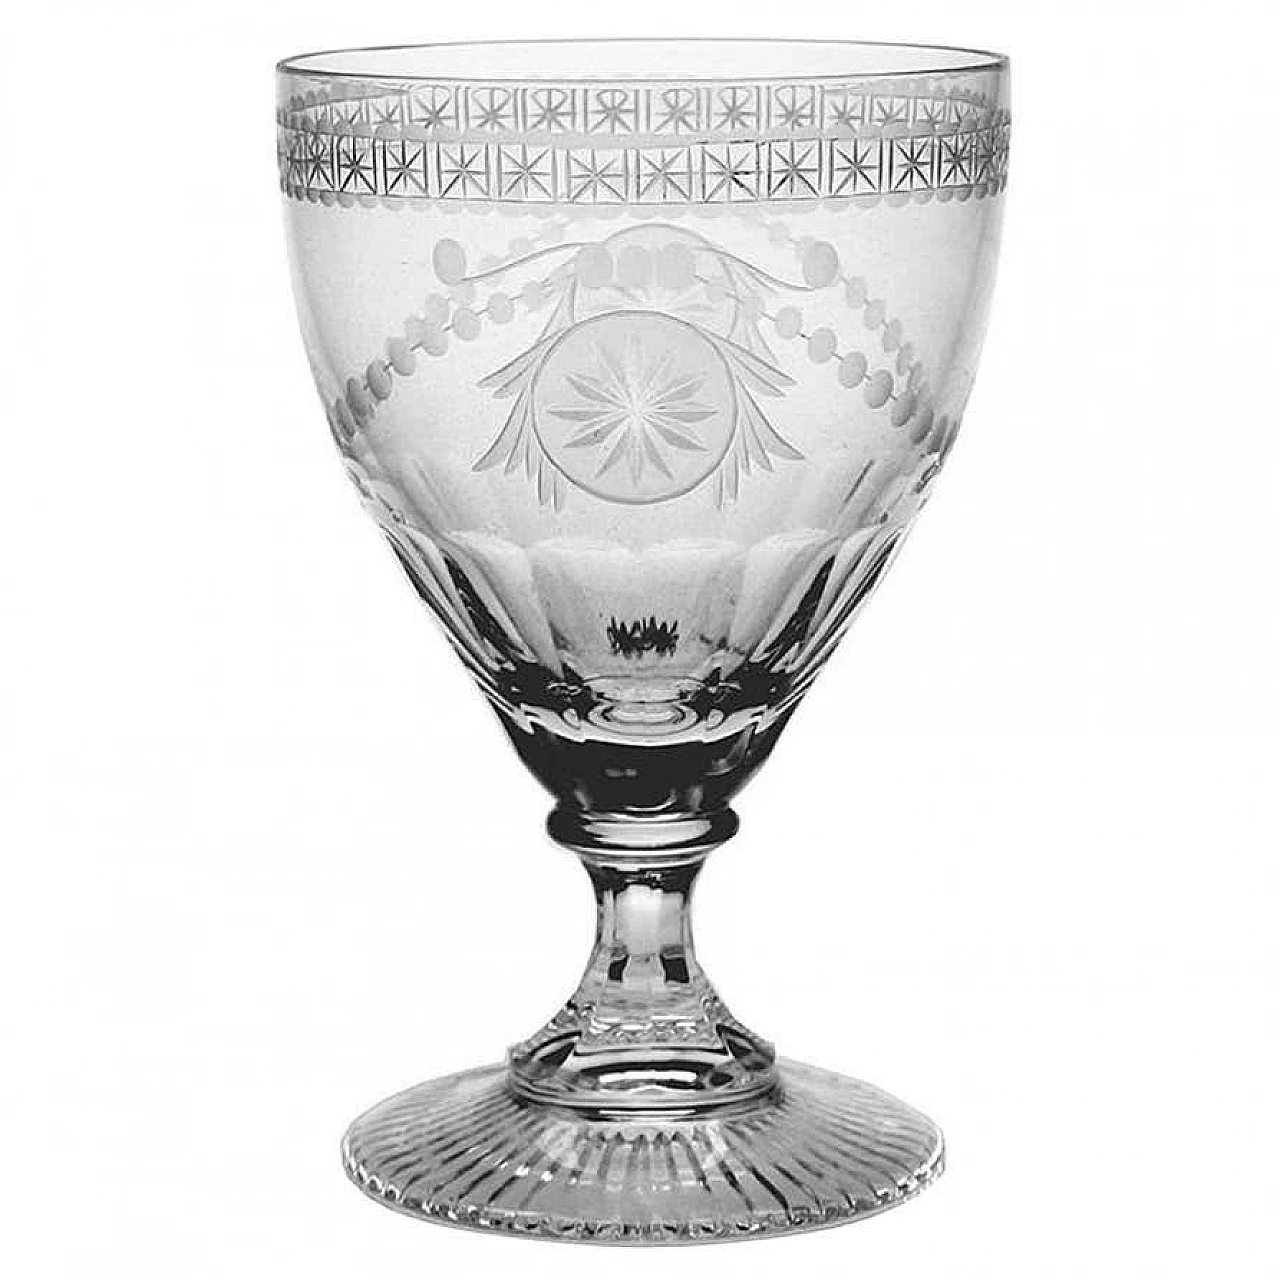 Crystal goblet of the Collection Crystal for Yeoward William, 1990s 17